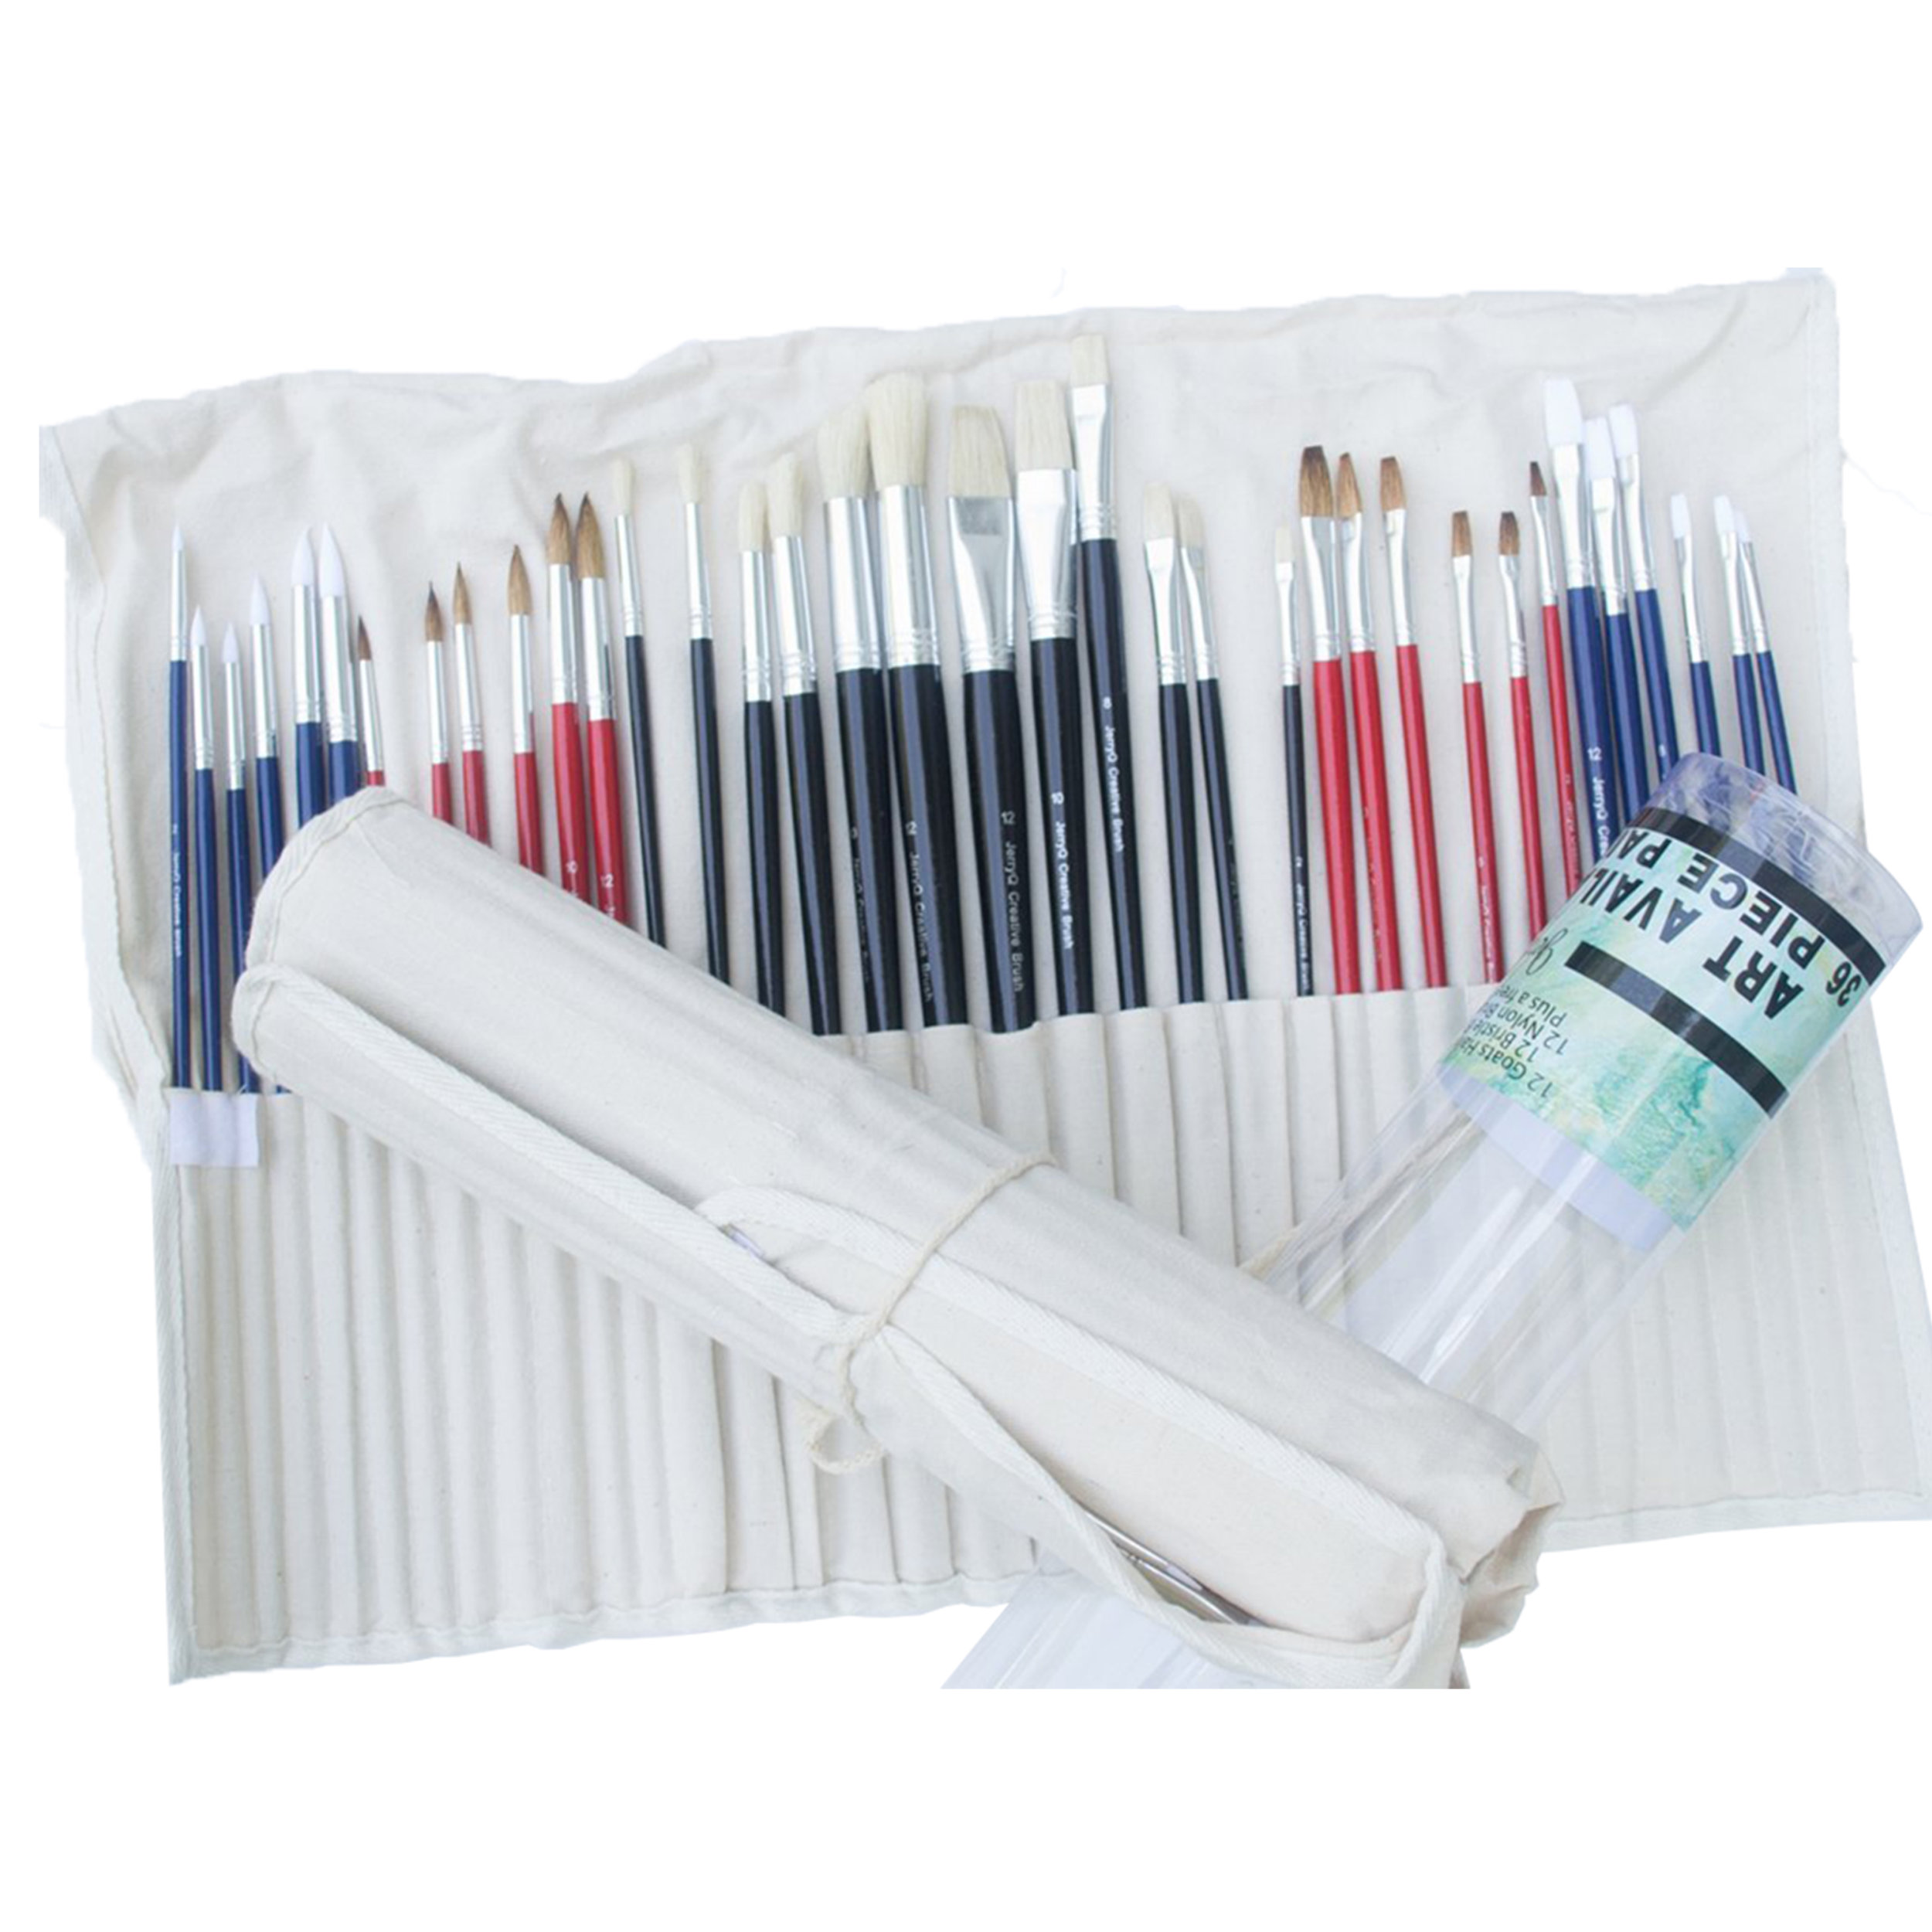 Jerry Q Art 12 PC White Synthetic Hair Round and Flat Paint Brush Set with Short Wood Handle for Acrylic Watercolor and All Media Jq17931